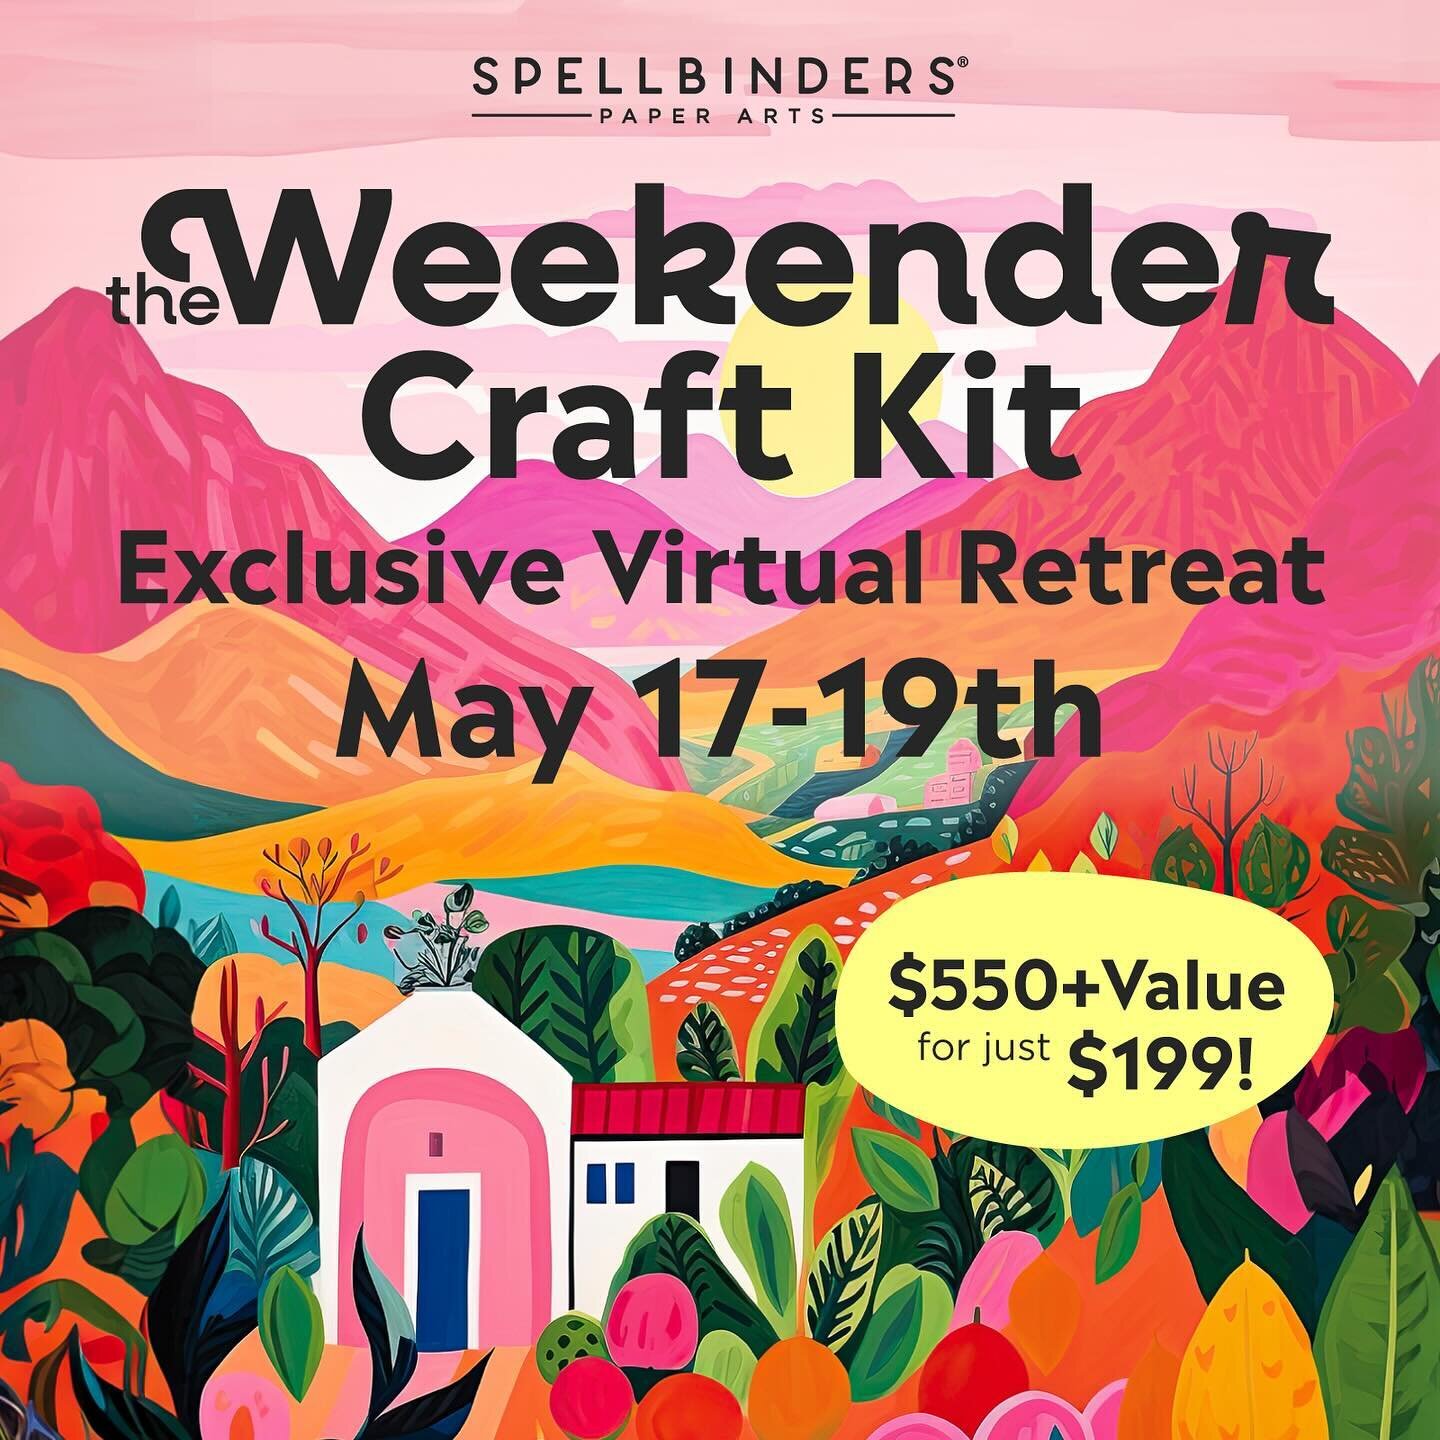 Join the Weekender event with @teamspellbinders and let us treat you to a weekend of creativity and fun!
.
I am so excited to join 9 other talented card makers in this wonderful virtual event! Swipe 👈🏻 to check out the lineup! Starting today, March